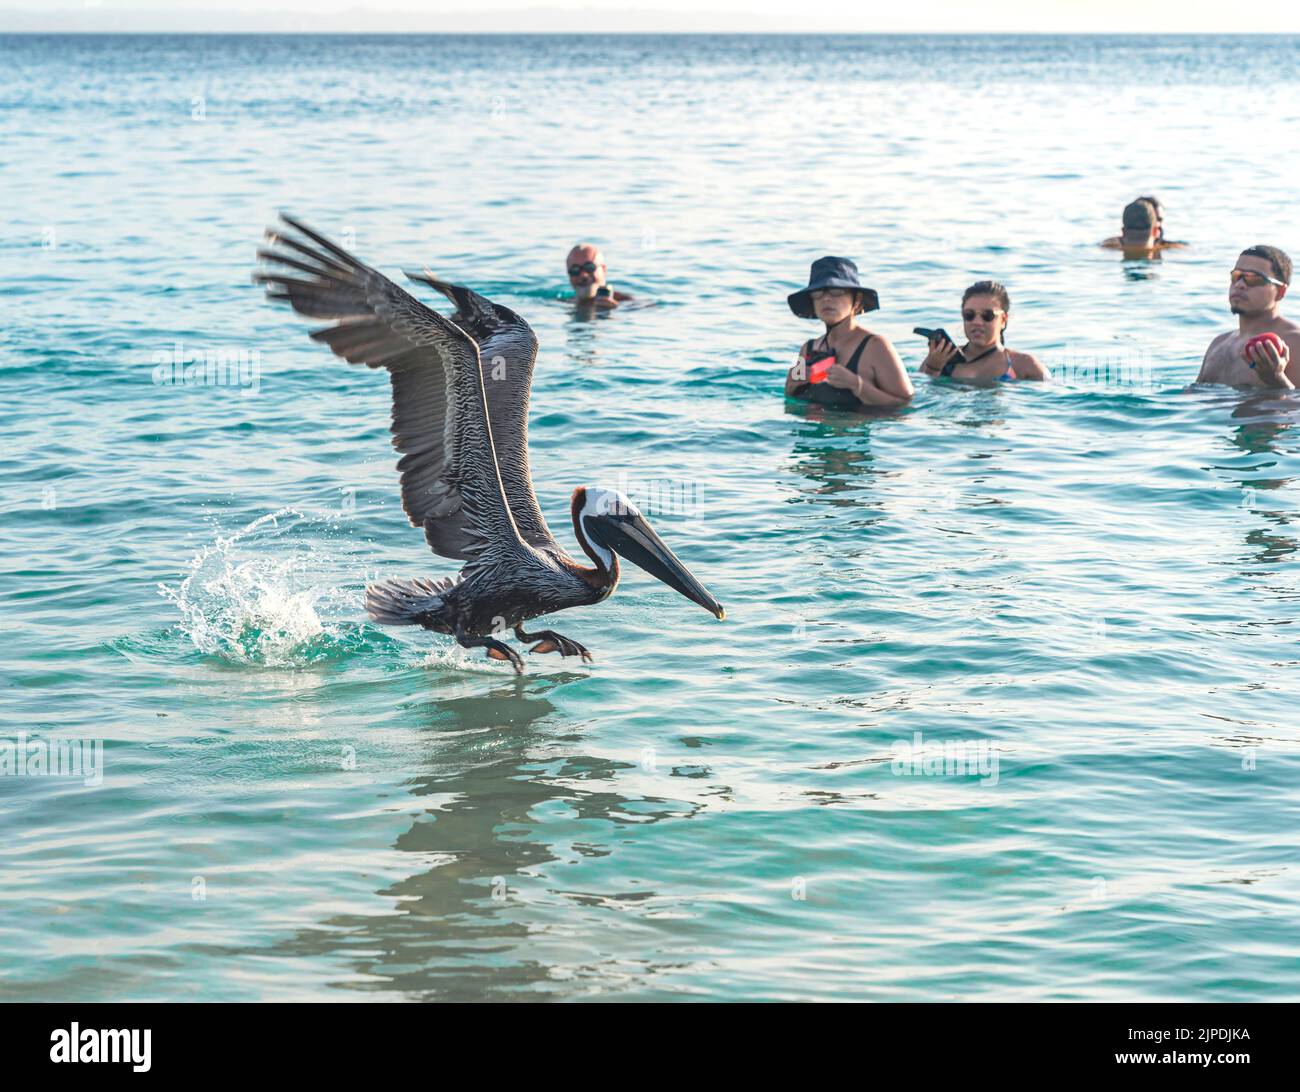 Aguadilla, Puerto Rico - August 27, 2021: A Crowd of Swimmers are Shocked to See a Wild Pelican Fly Near Them in Puerto Rico. Stock Photo